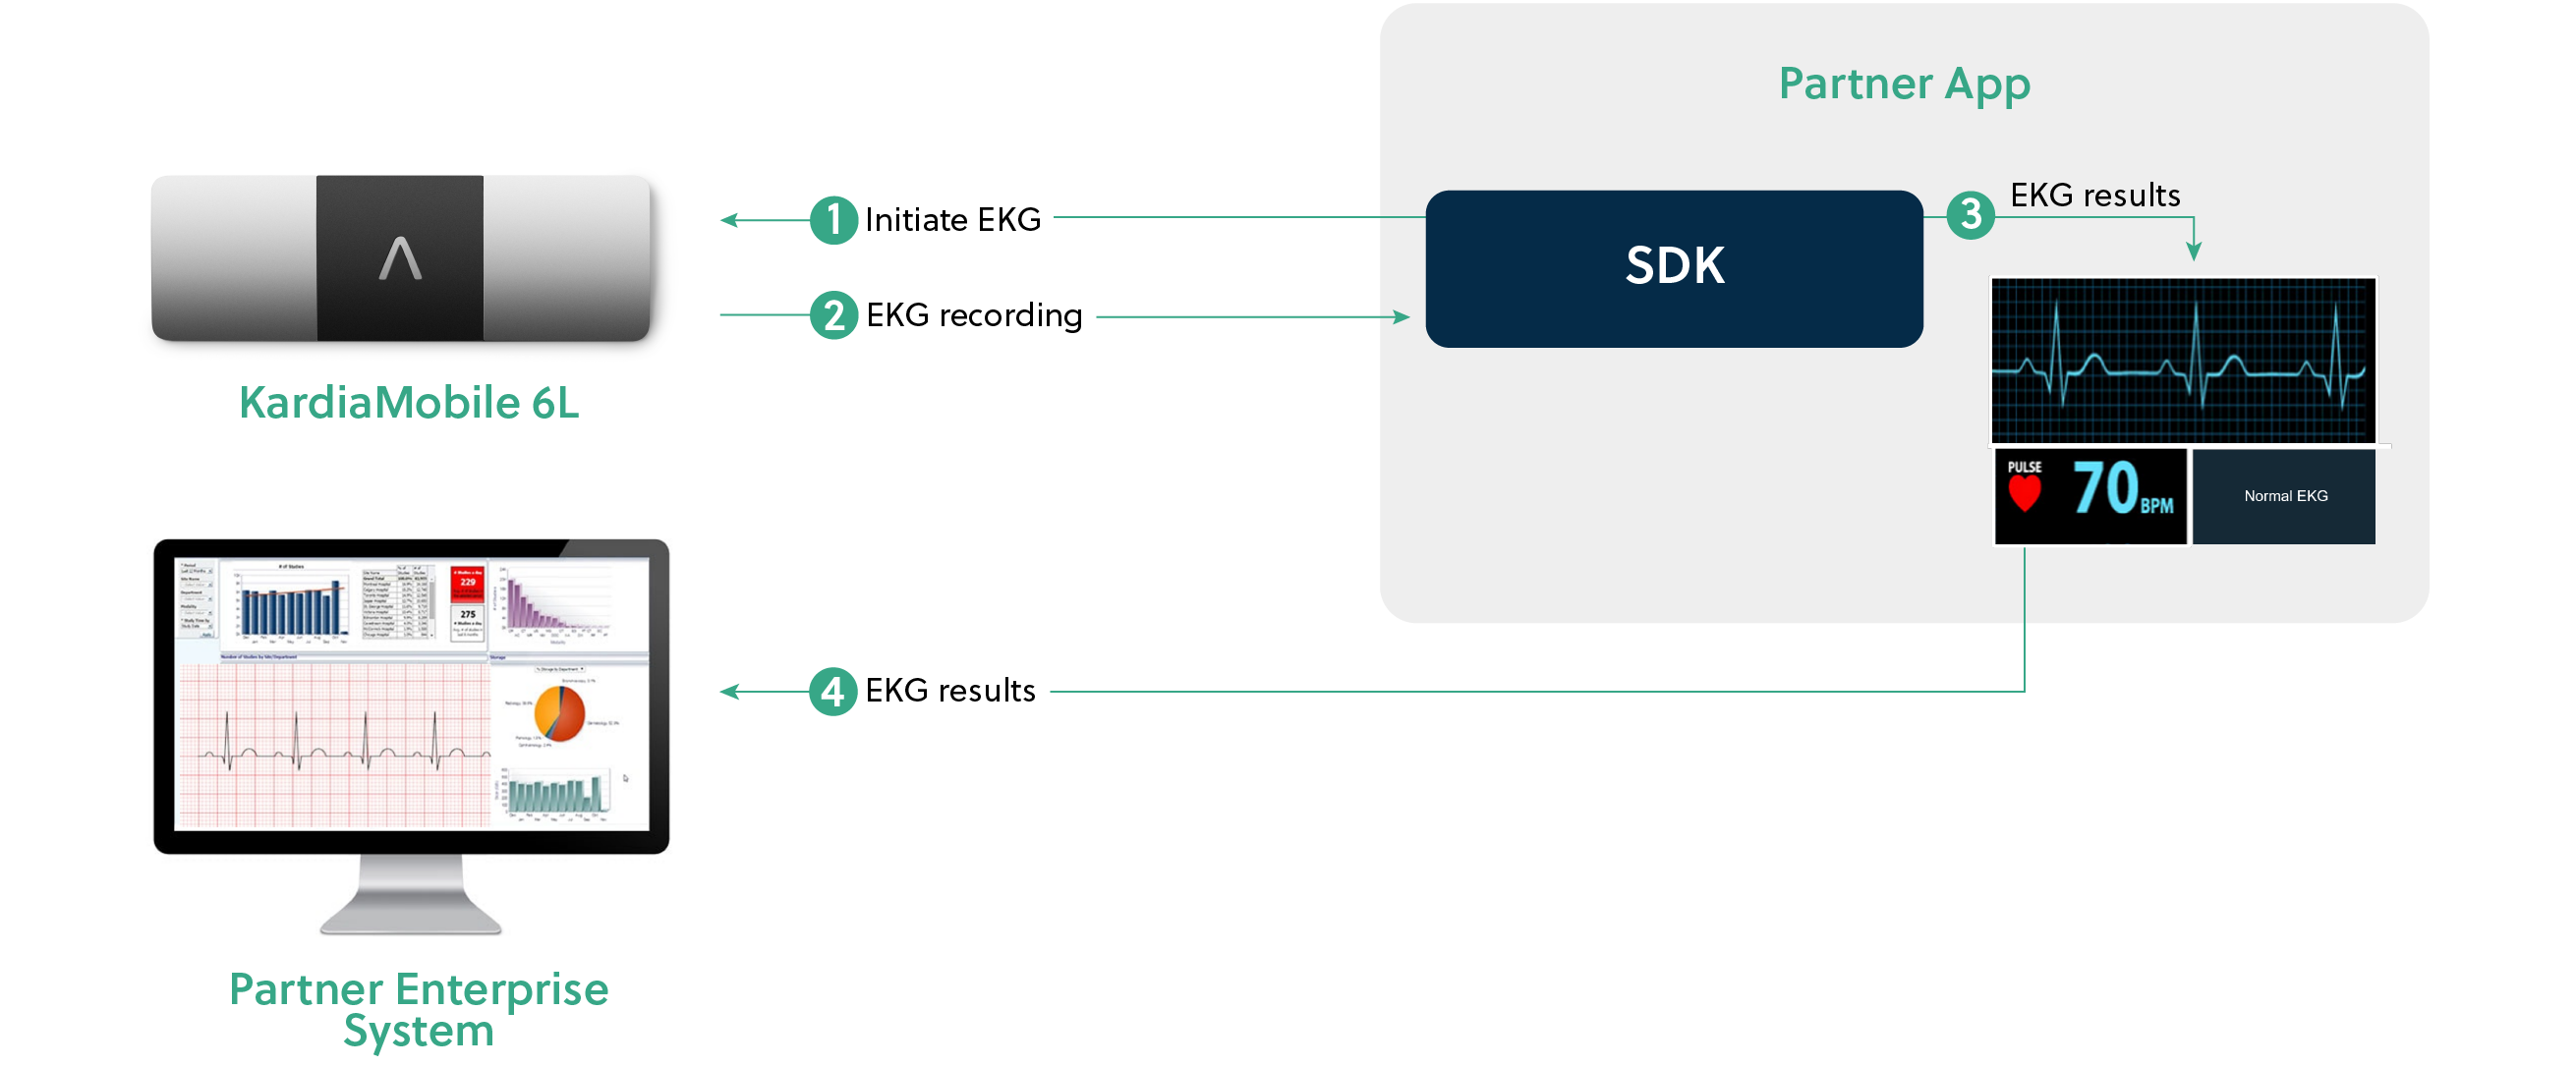 Diagram showing how the Kardia app SDK works between the KardiaMobile 6L and the Partner Enterprise System.